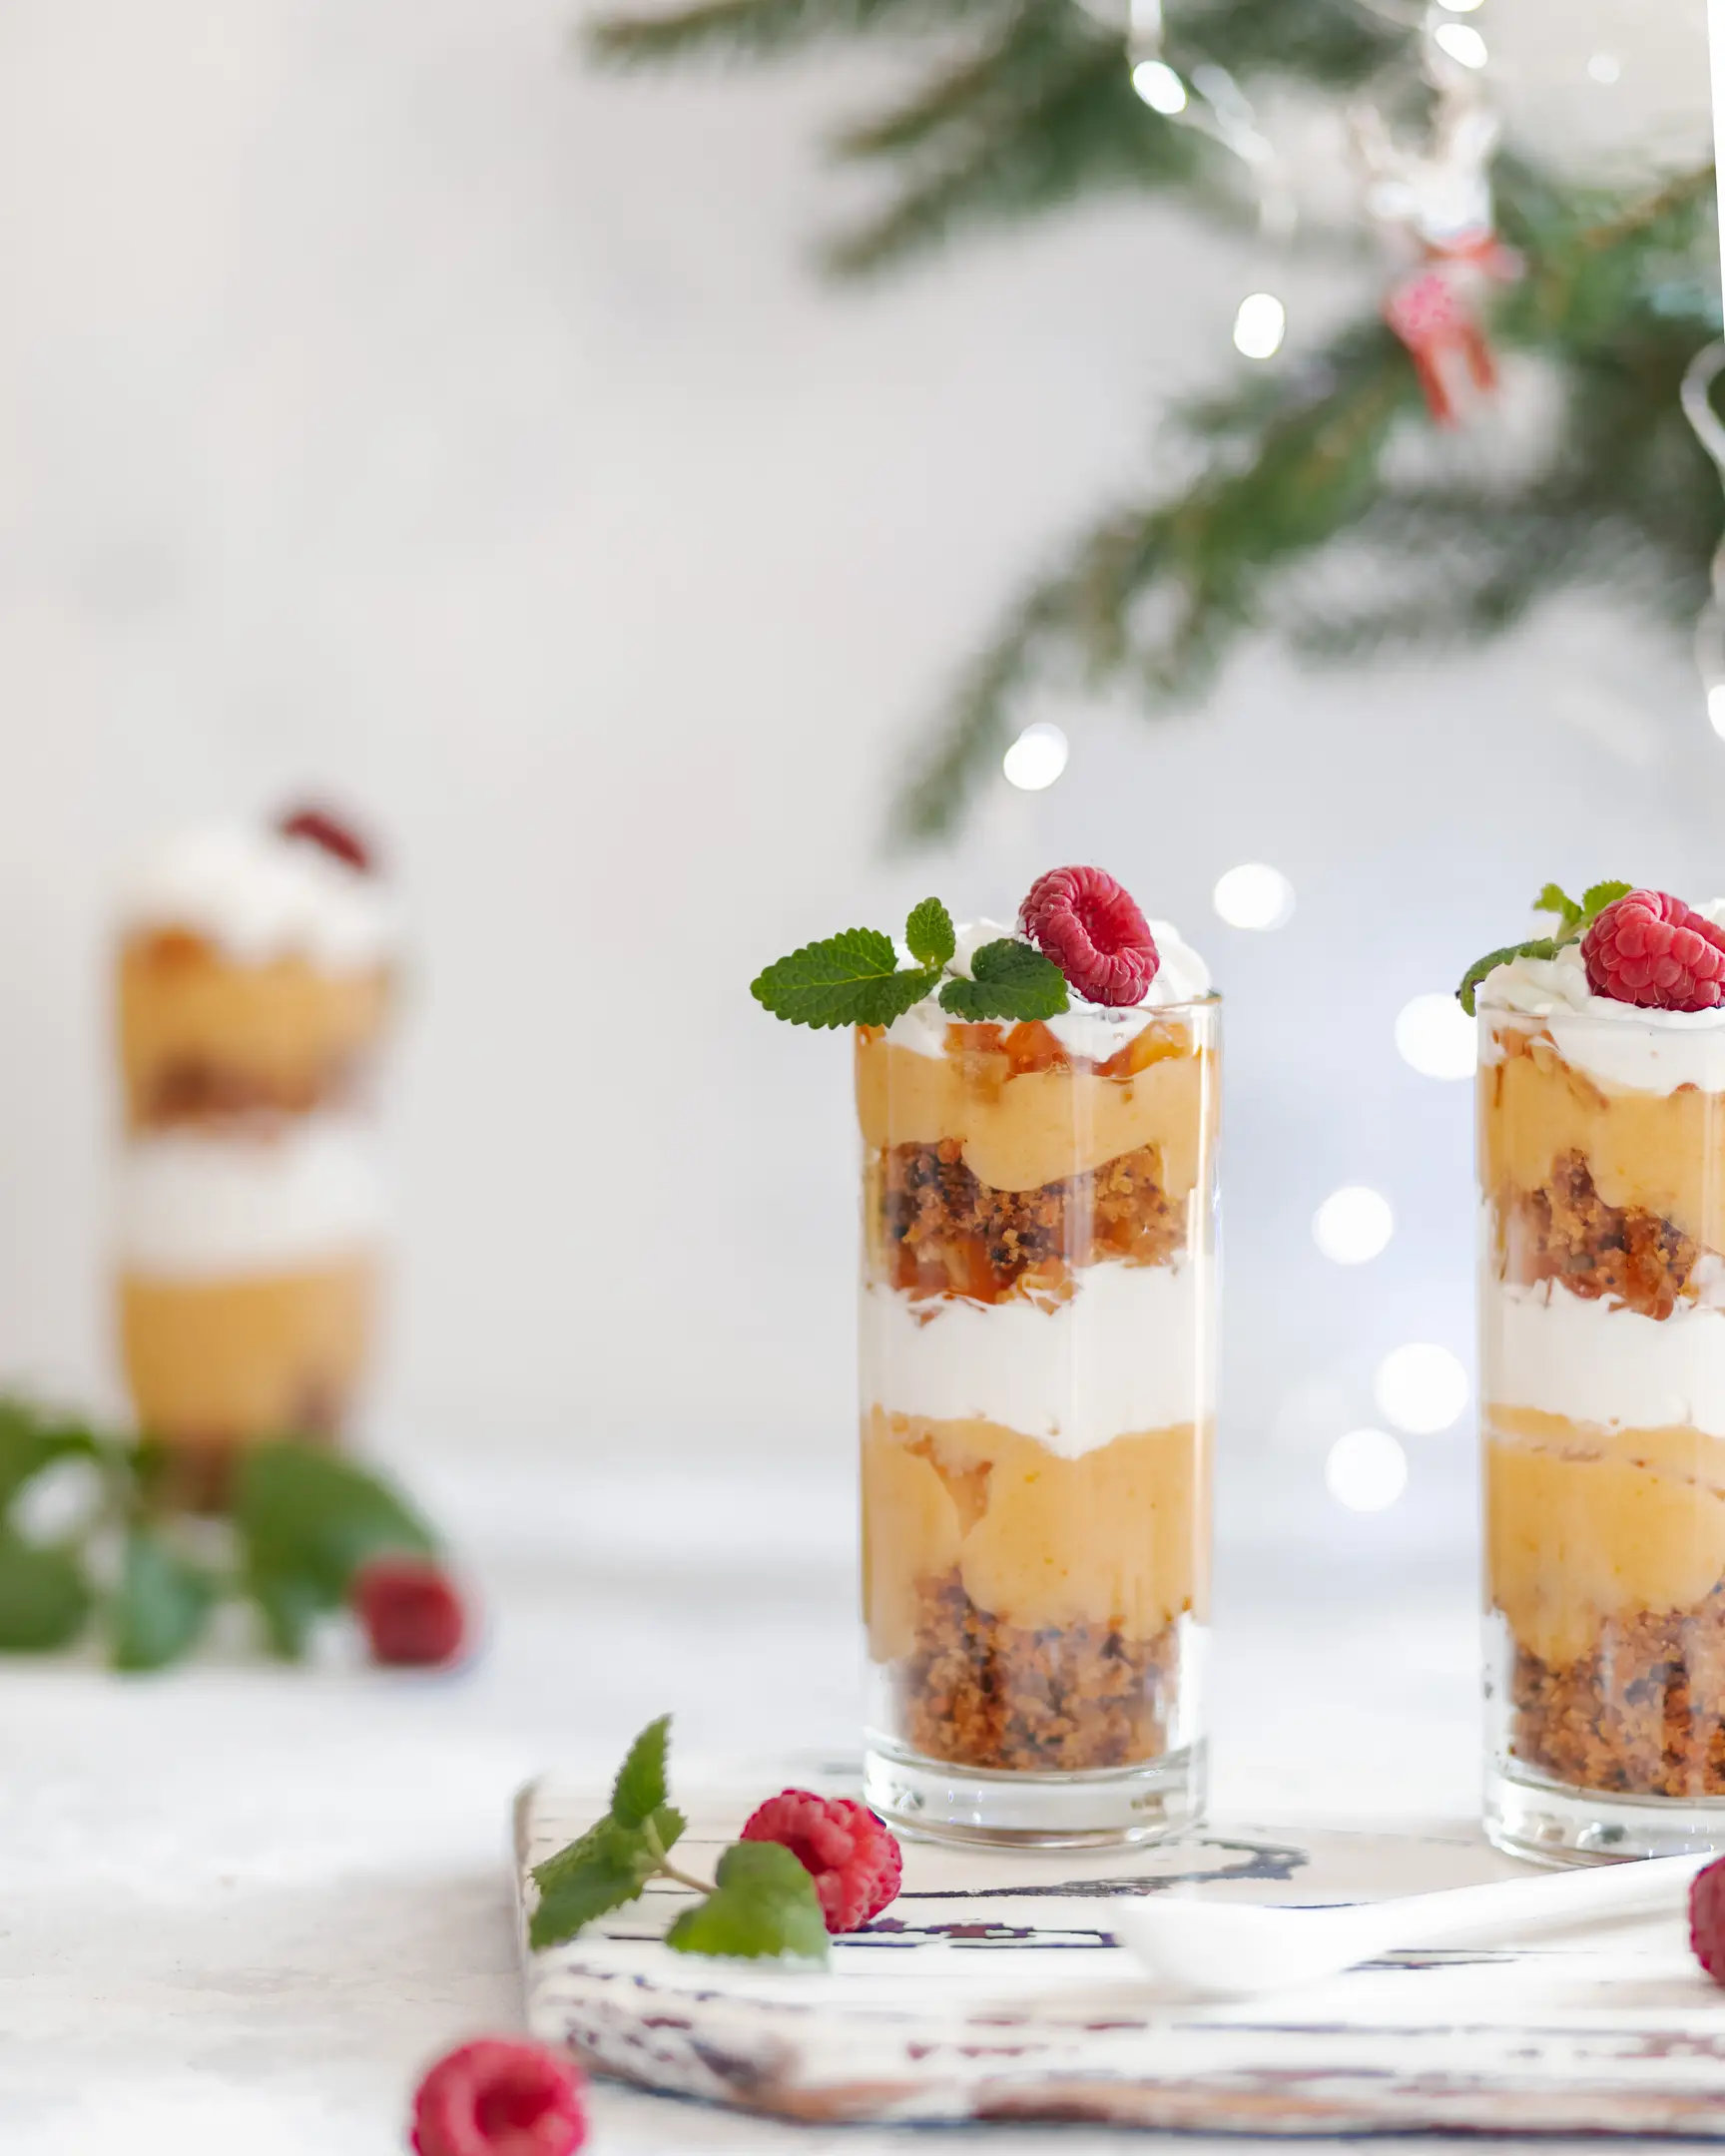 There are trifles on a wooden cutting board.  There are trifles on a wooden cutting board. Behind them are glowing Christmas lights.